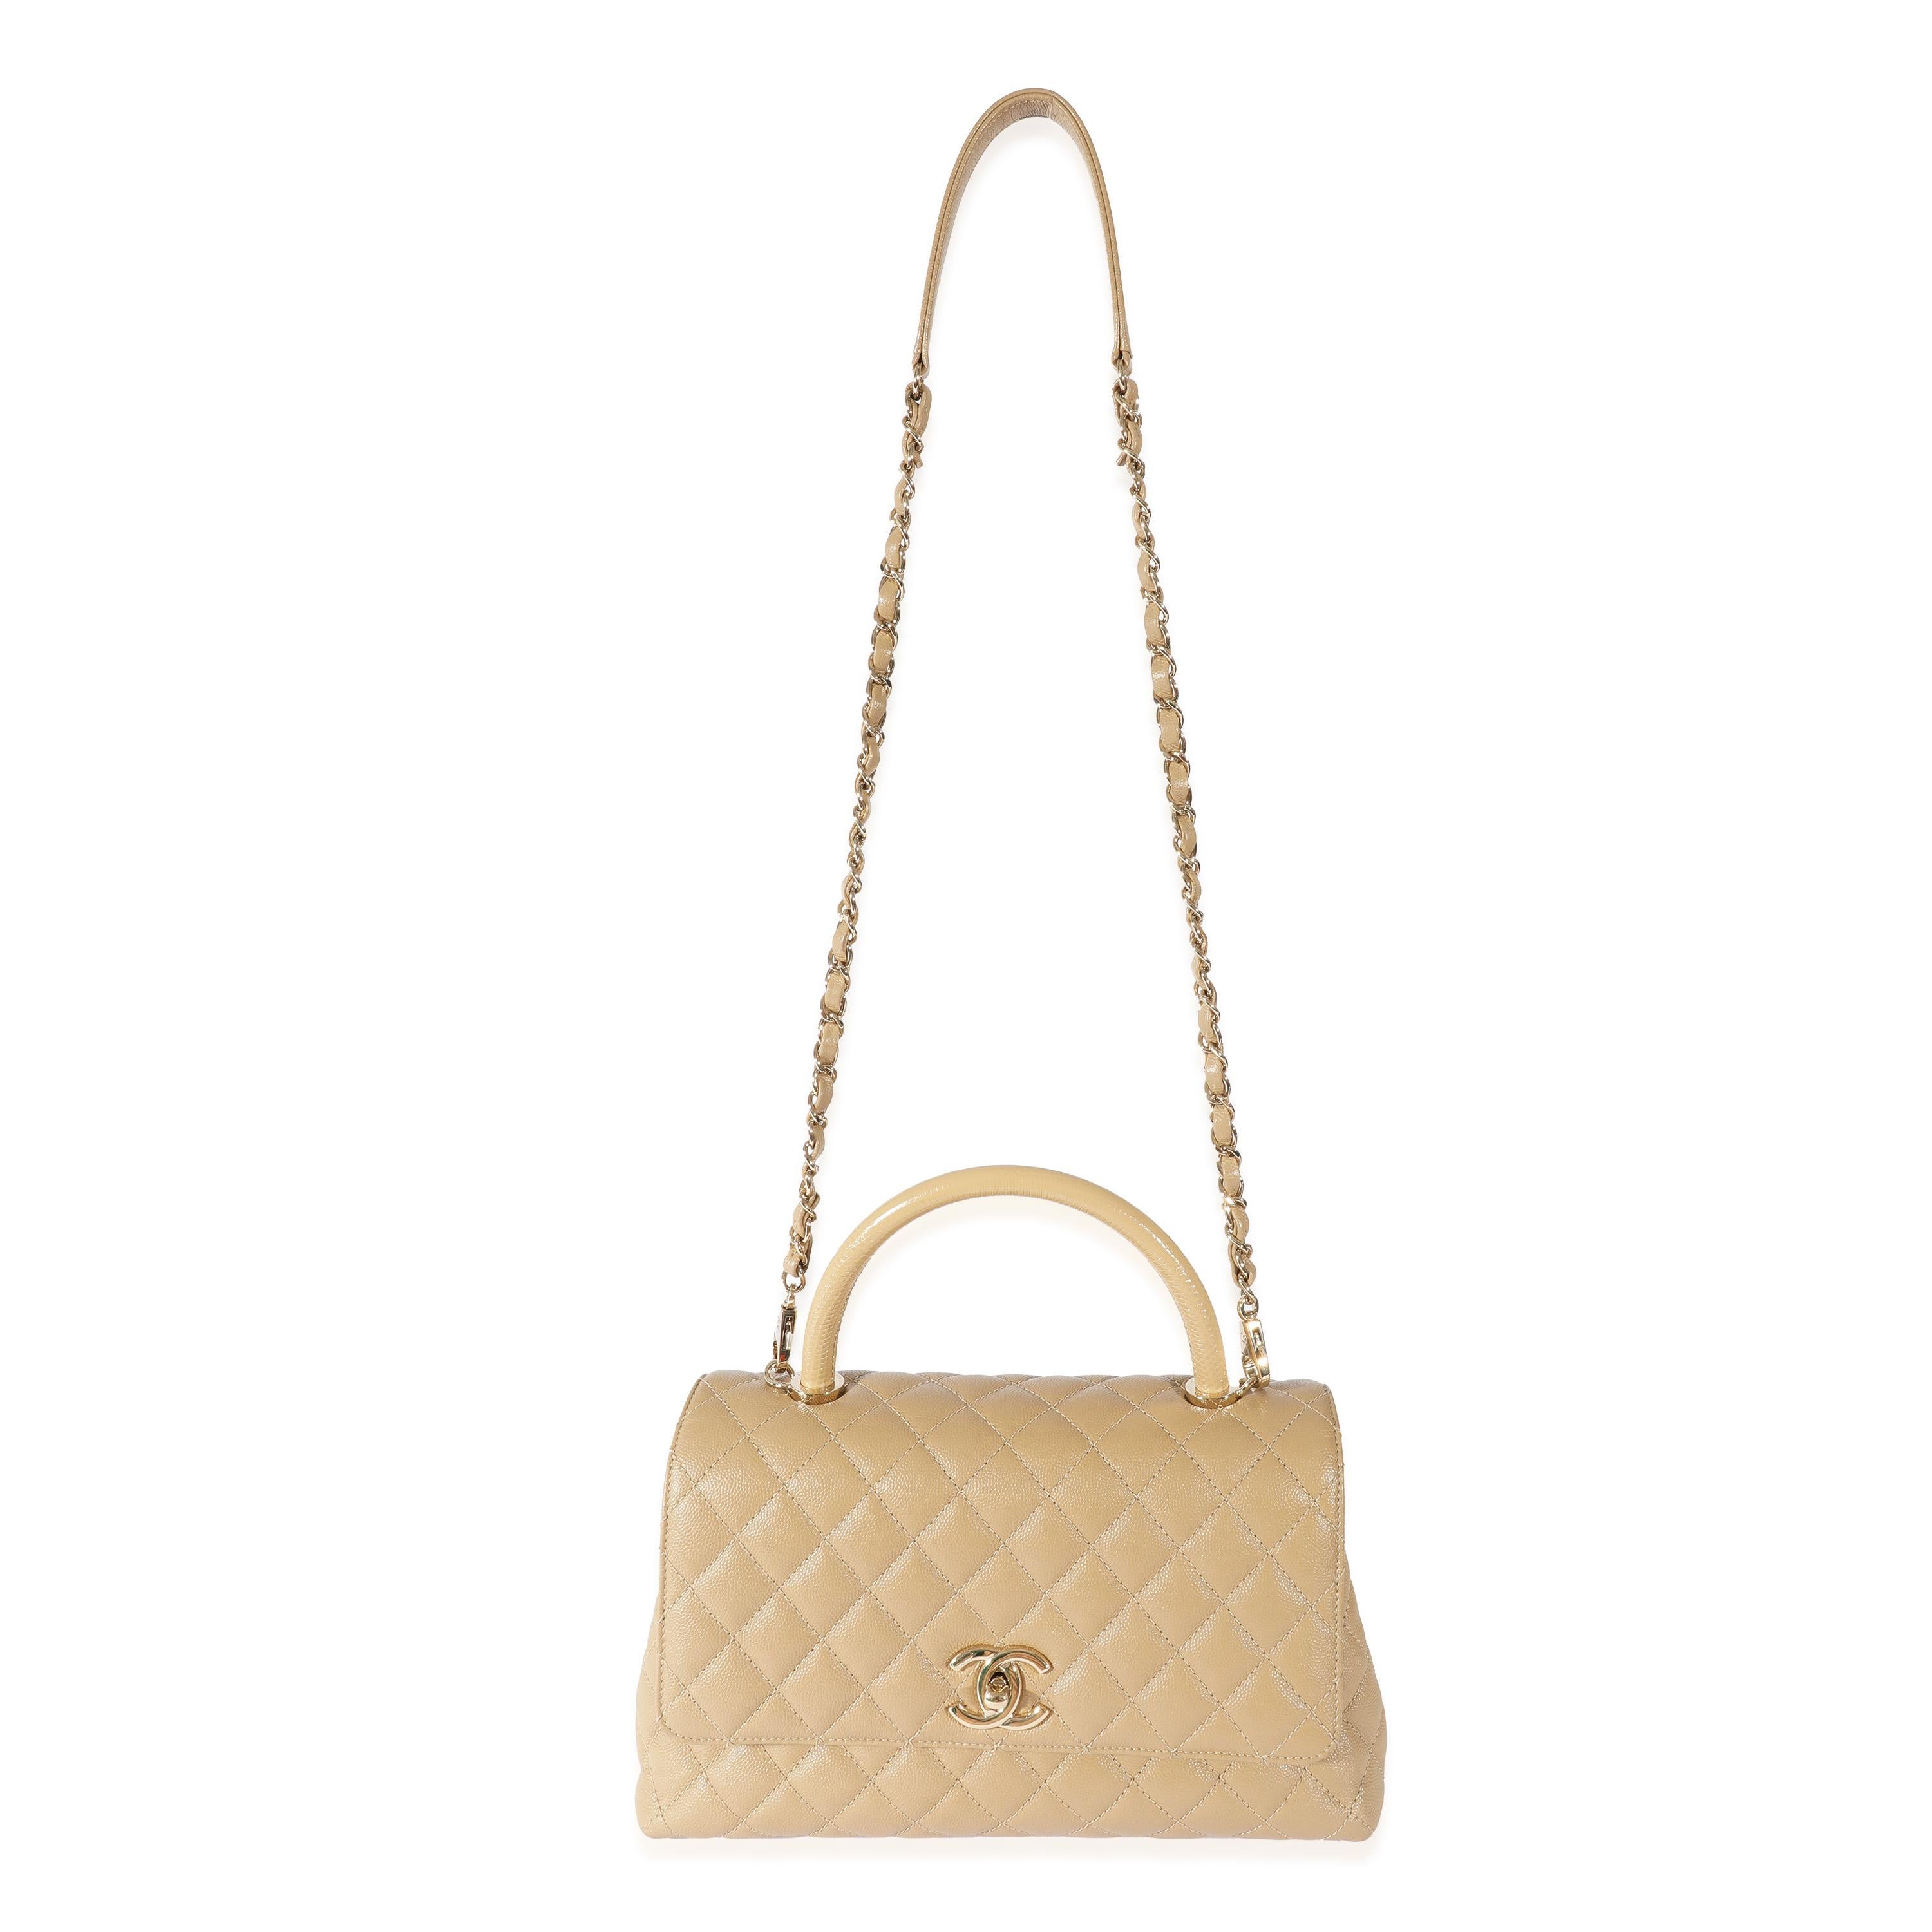 Listing Title: Chanel Brown Caviar Medium Coco Top Handle
 SKU: 128547
 Condition: Pre-owned 
 Handbag Condition: Very Good
 Condition Comments: Very Good Condition. Faint scuffing to corners and exterior leather. Light marks at top handle. Light